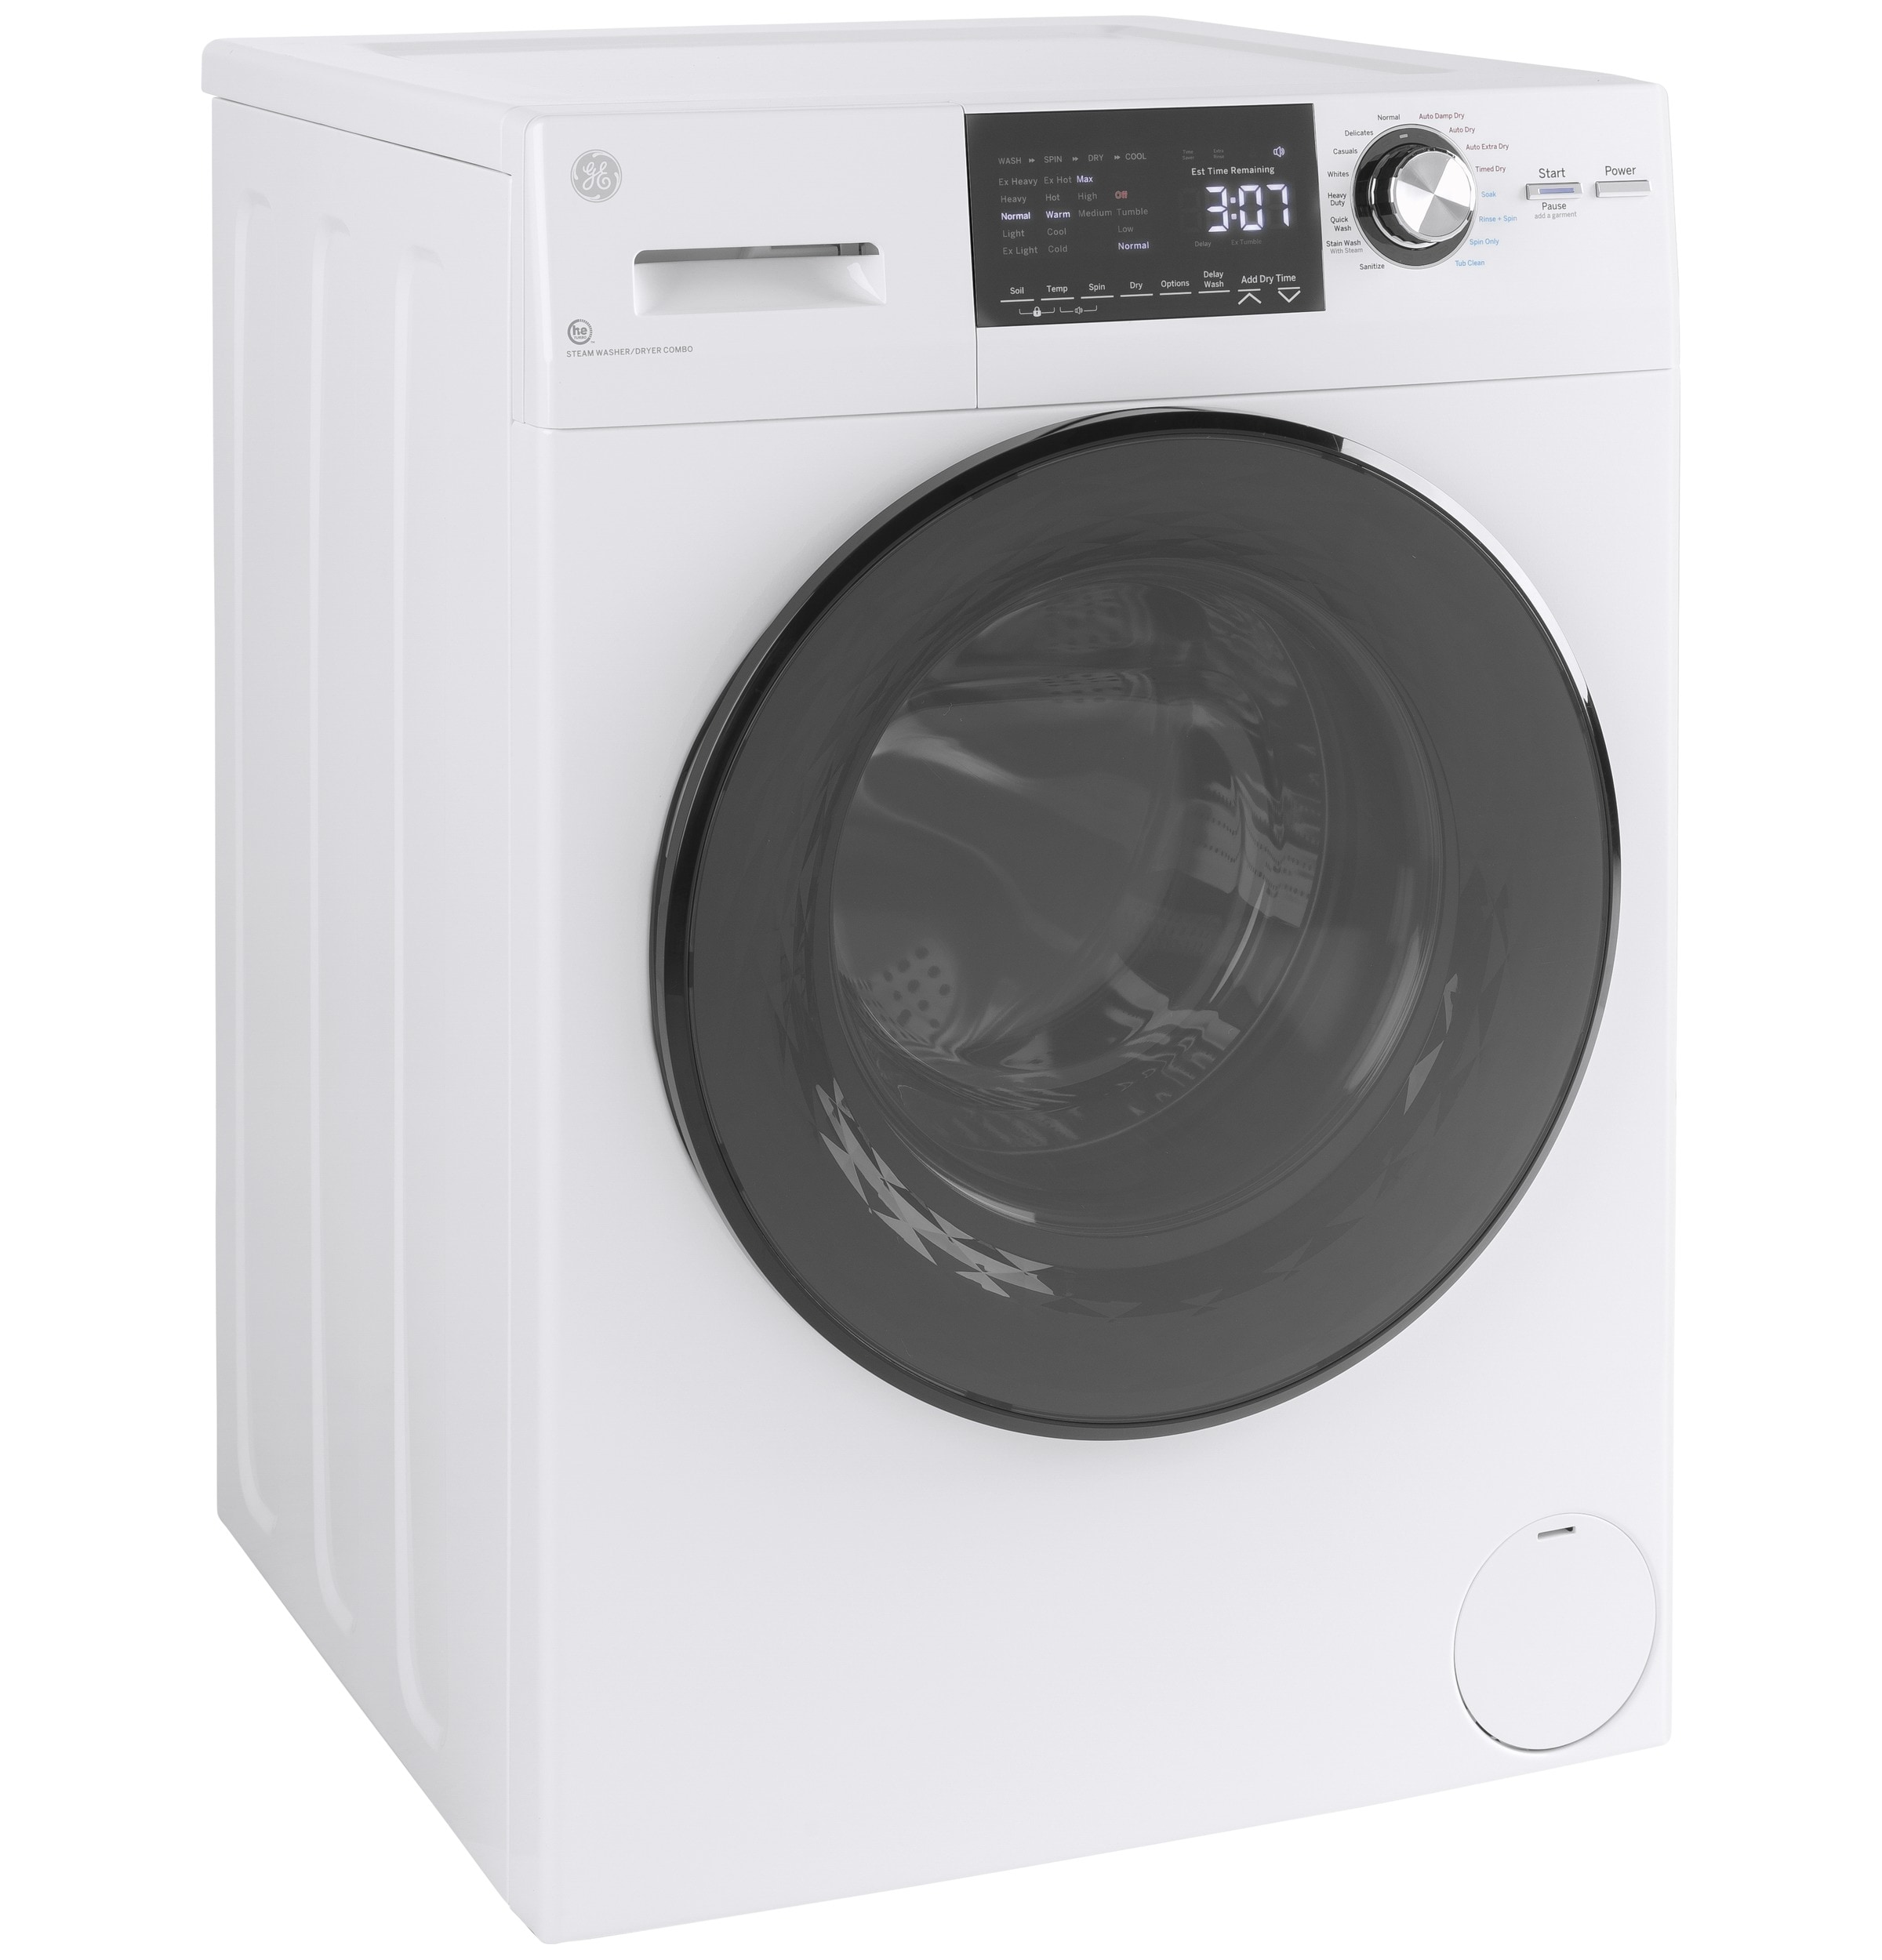 Dryer Household Small Clothes Dryer Automatic Anti-bacterial, Anti-mite and  Anti-moisture Quick Drying Clothes